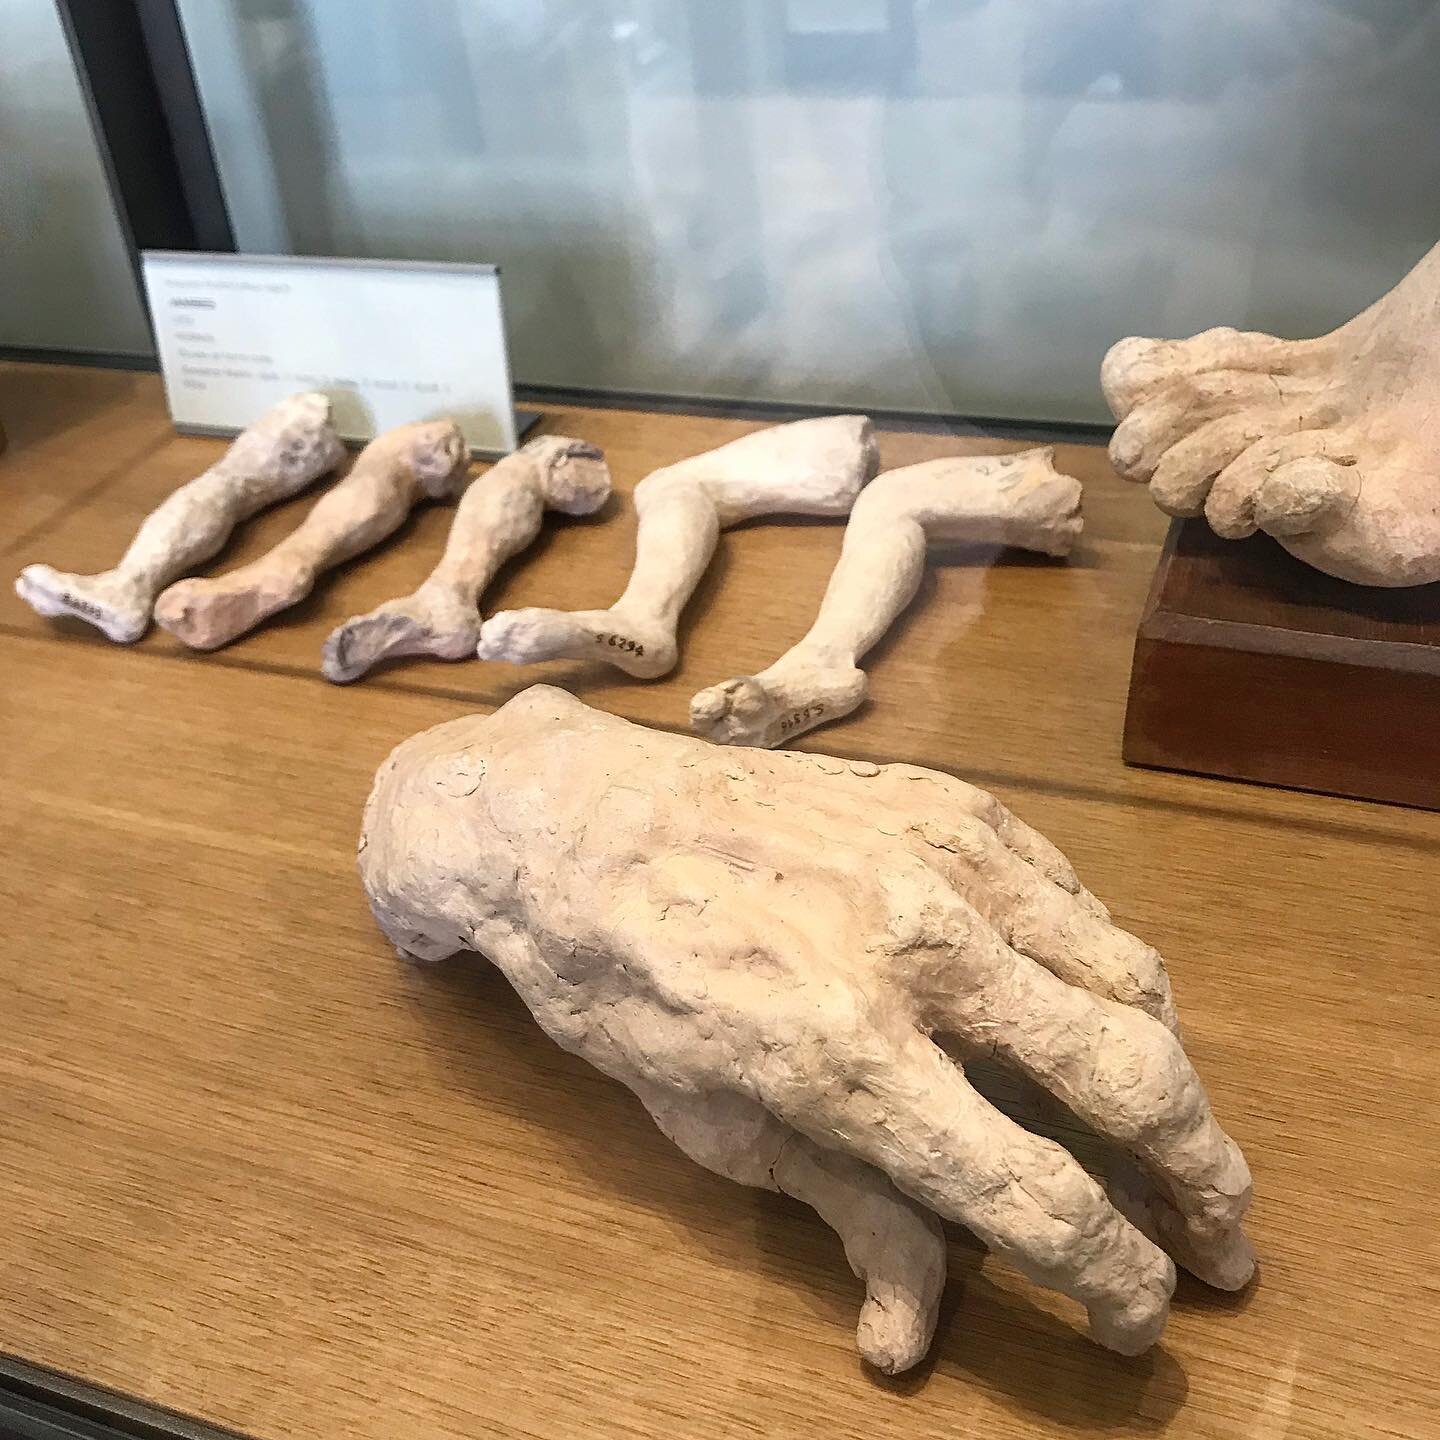 Ok, one more limb-thing from Rodin @museerodinparis Disembodied heads, hands, feet, arms and other parts had been stockpiled by the hundreds over the years, providing the sculptor with a wealth of poses and expressions that he could literally take of